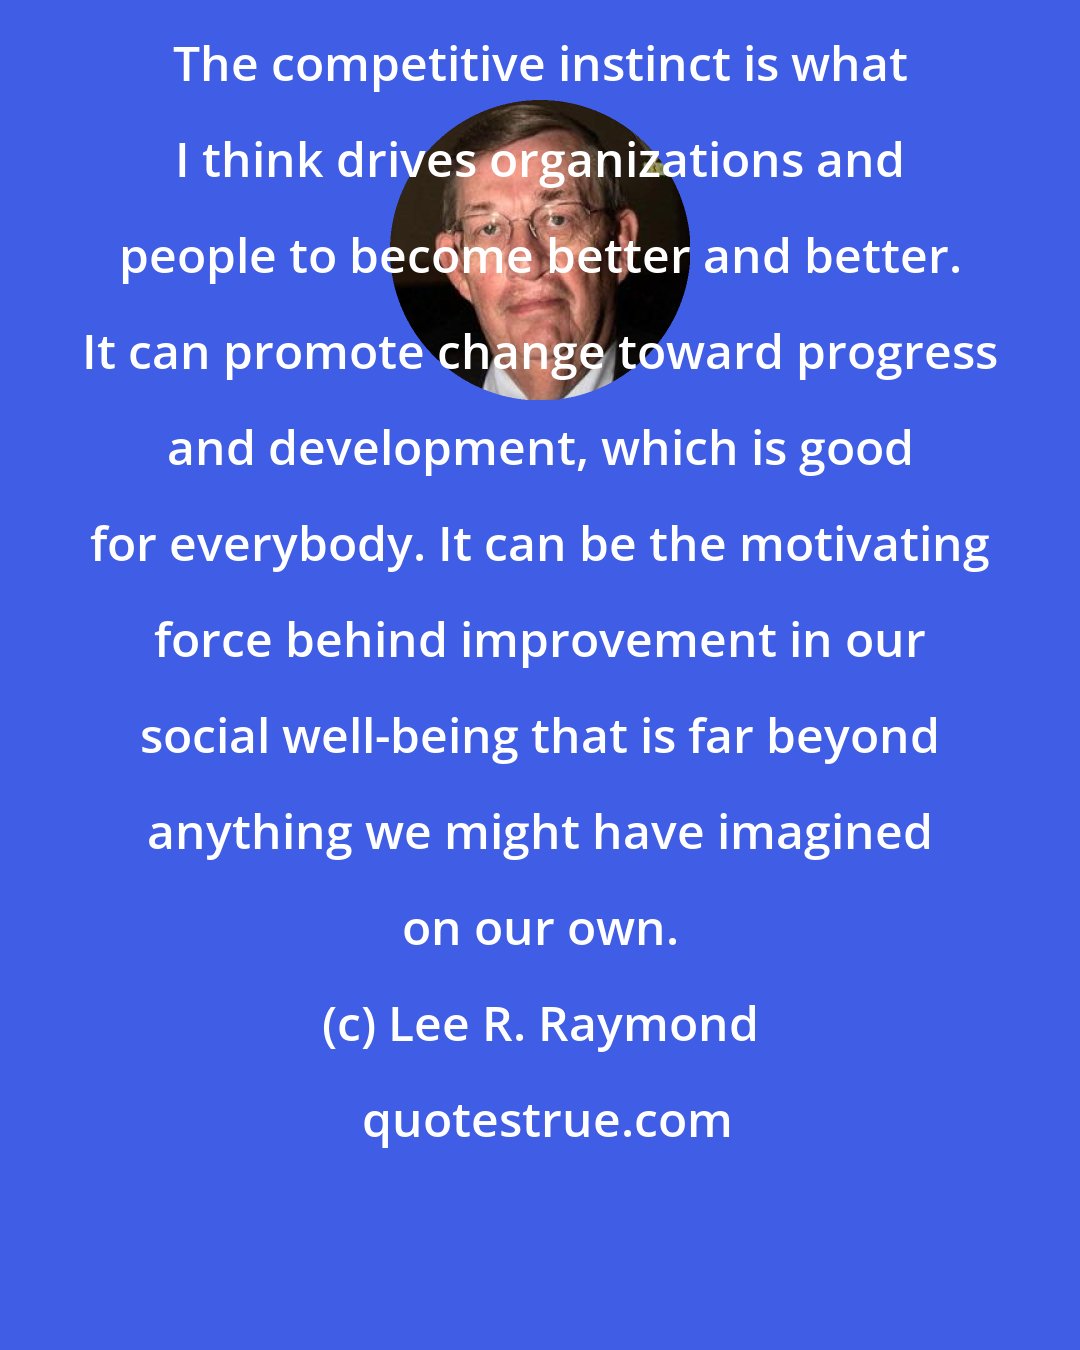 Lee R. Raymond: The competitive instinct is what I think drives organizations and people to become better and better. It can promote change toward progress and development, which is good for everybody. It can be the motivating force behind improvement in our social well-being that is far beyond anything we might have imagined on our own.